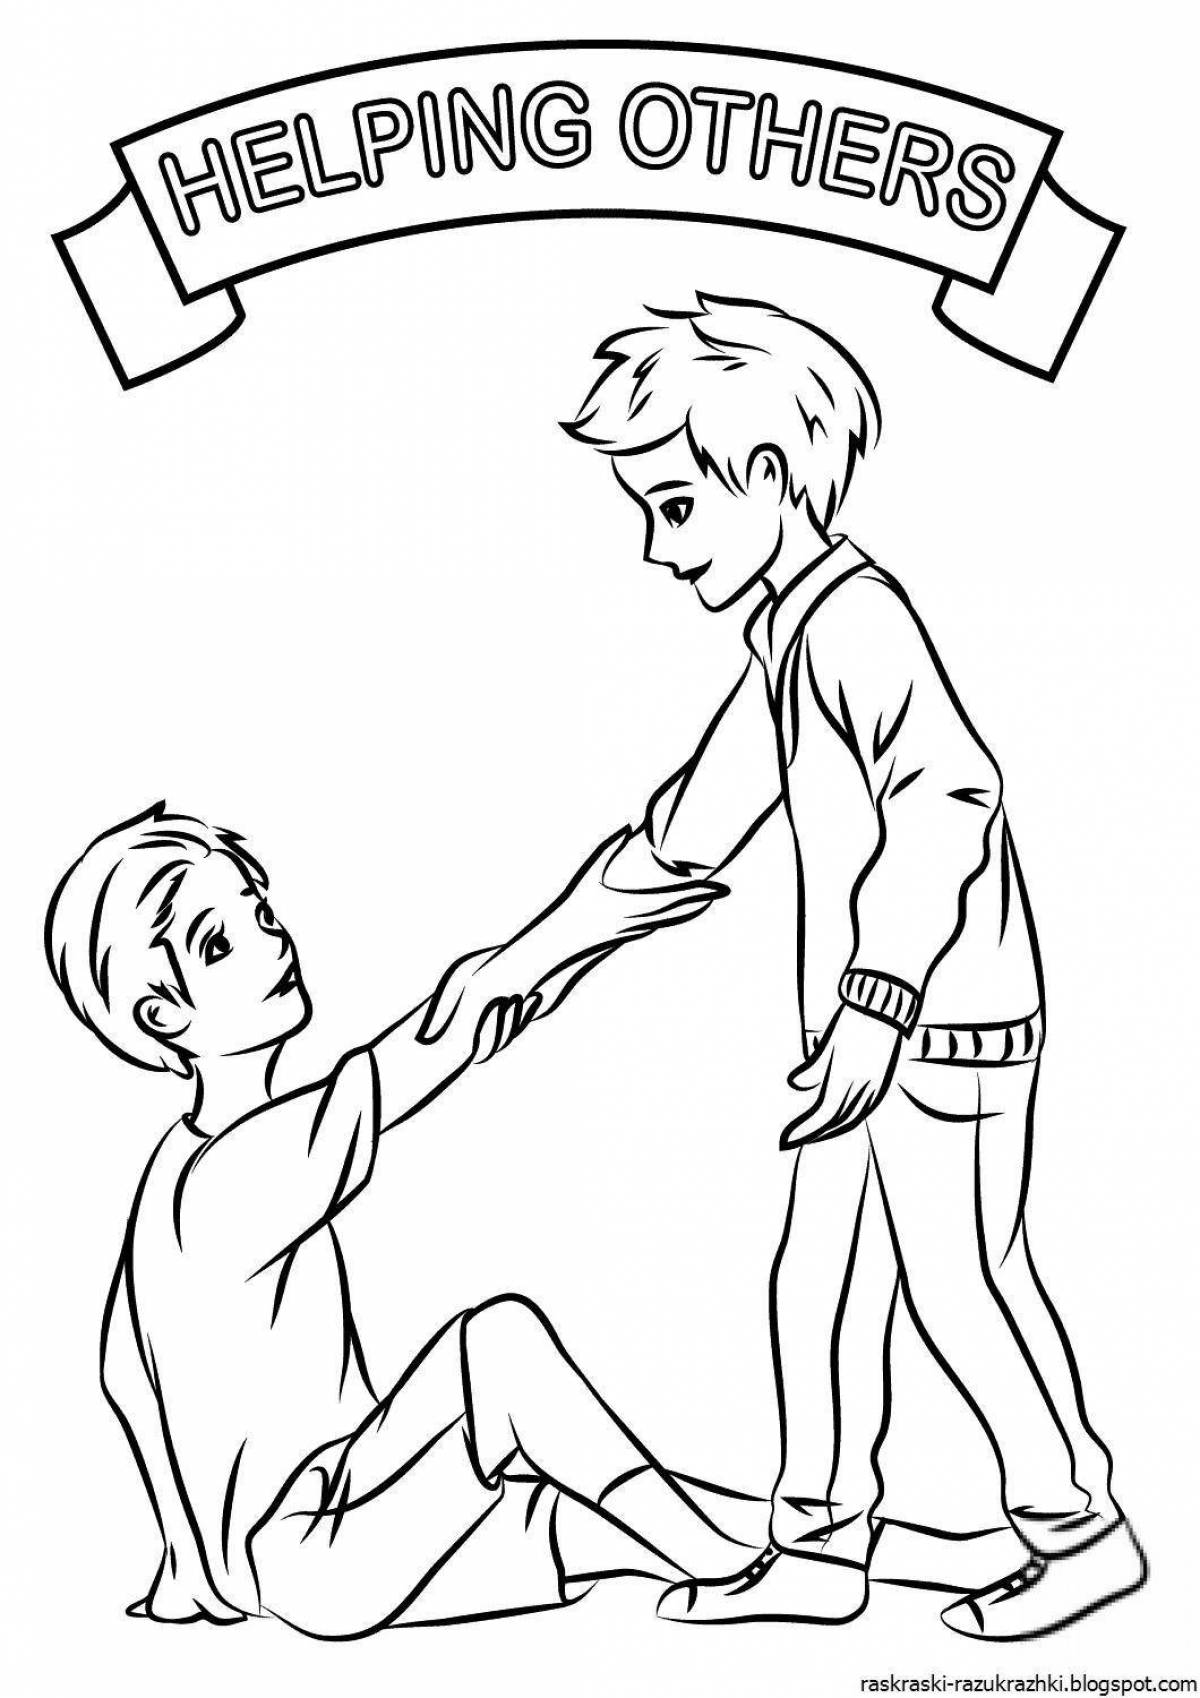 Cute courtesy coloring page